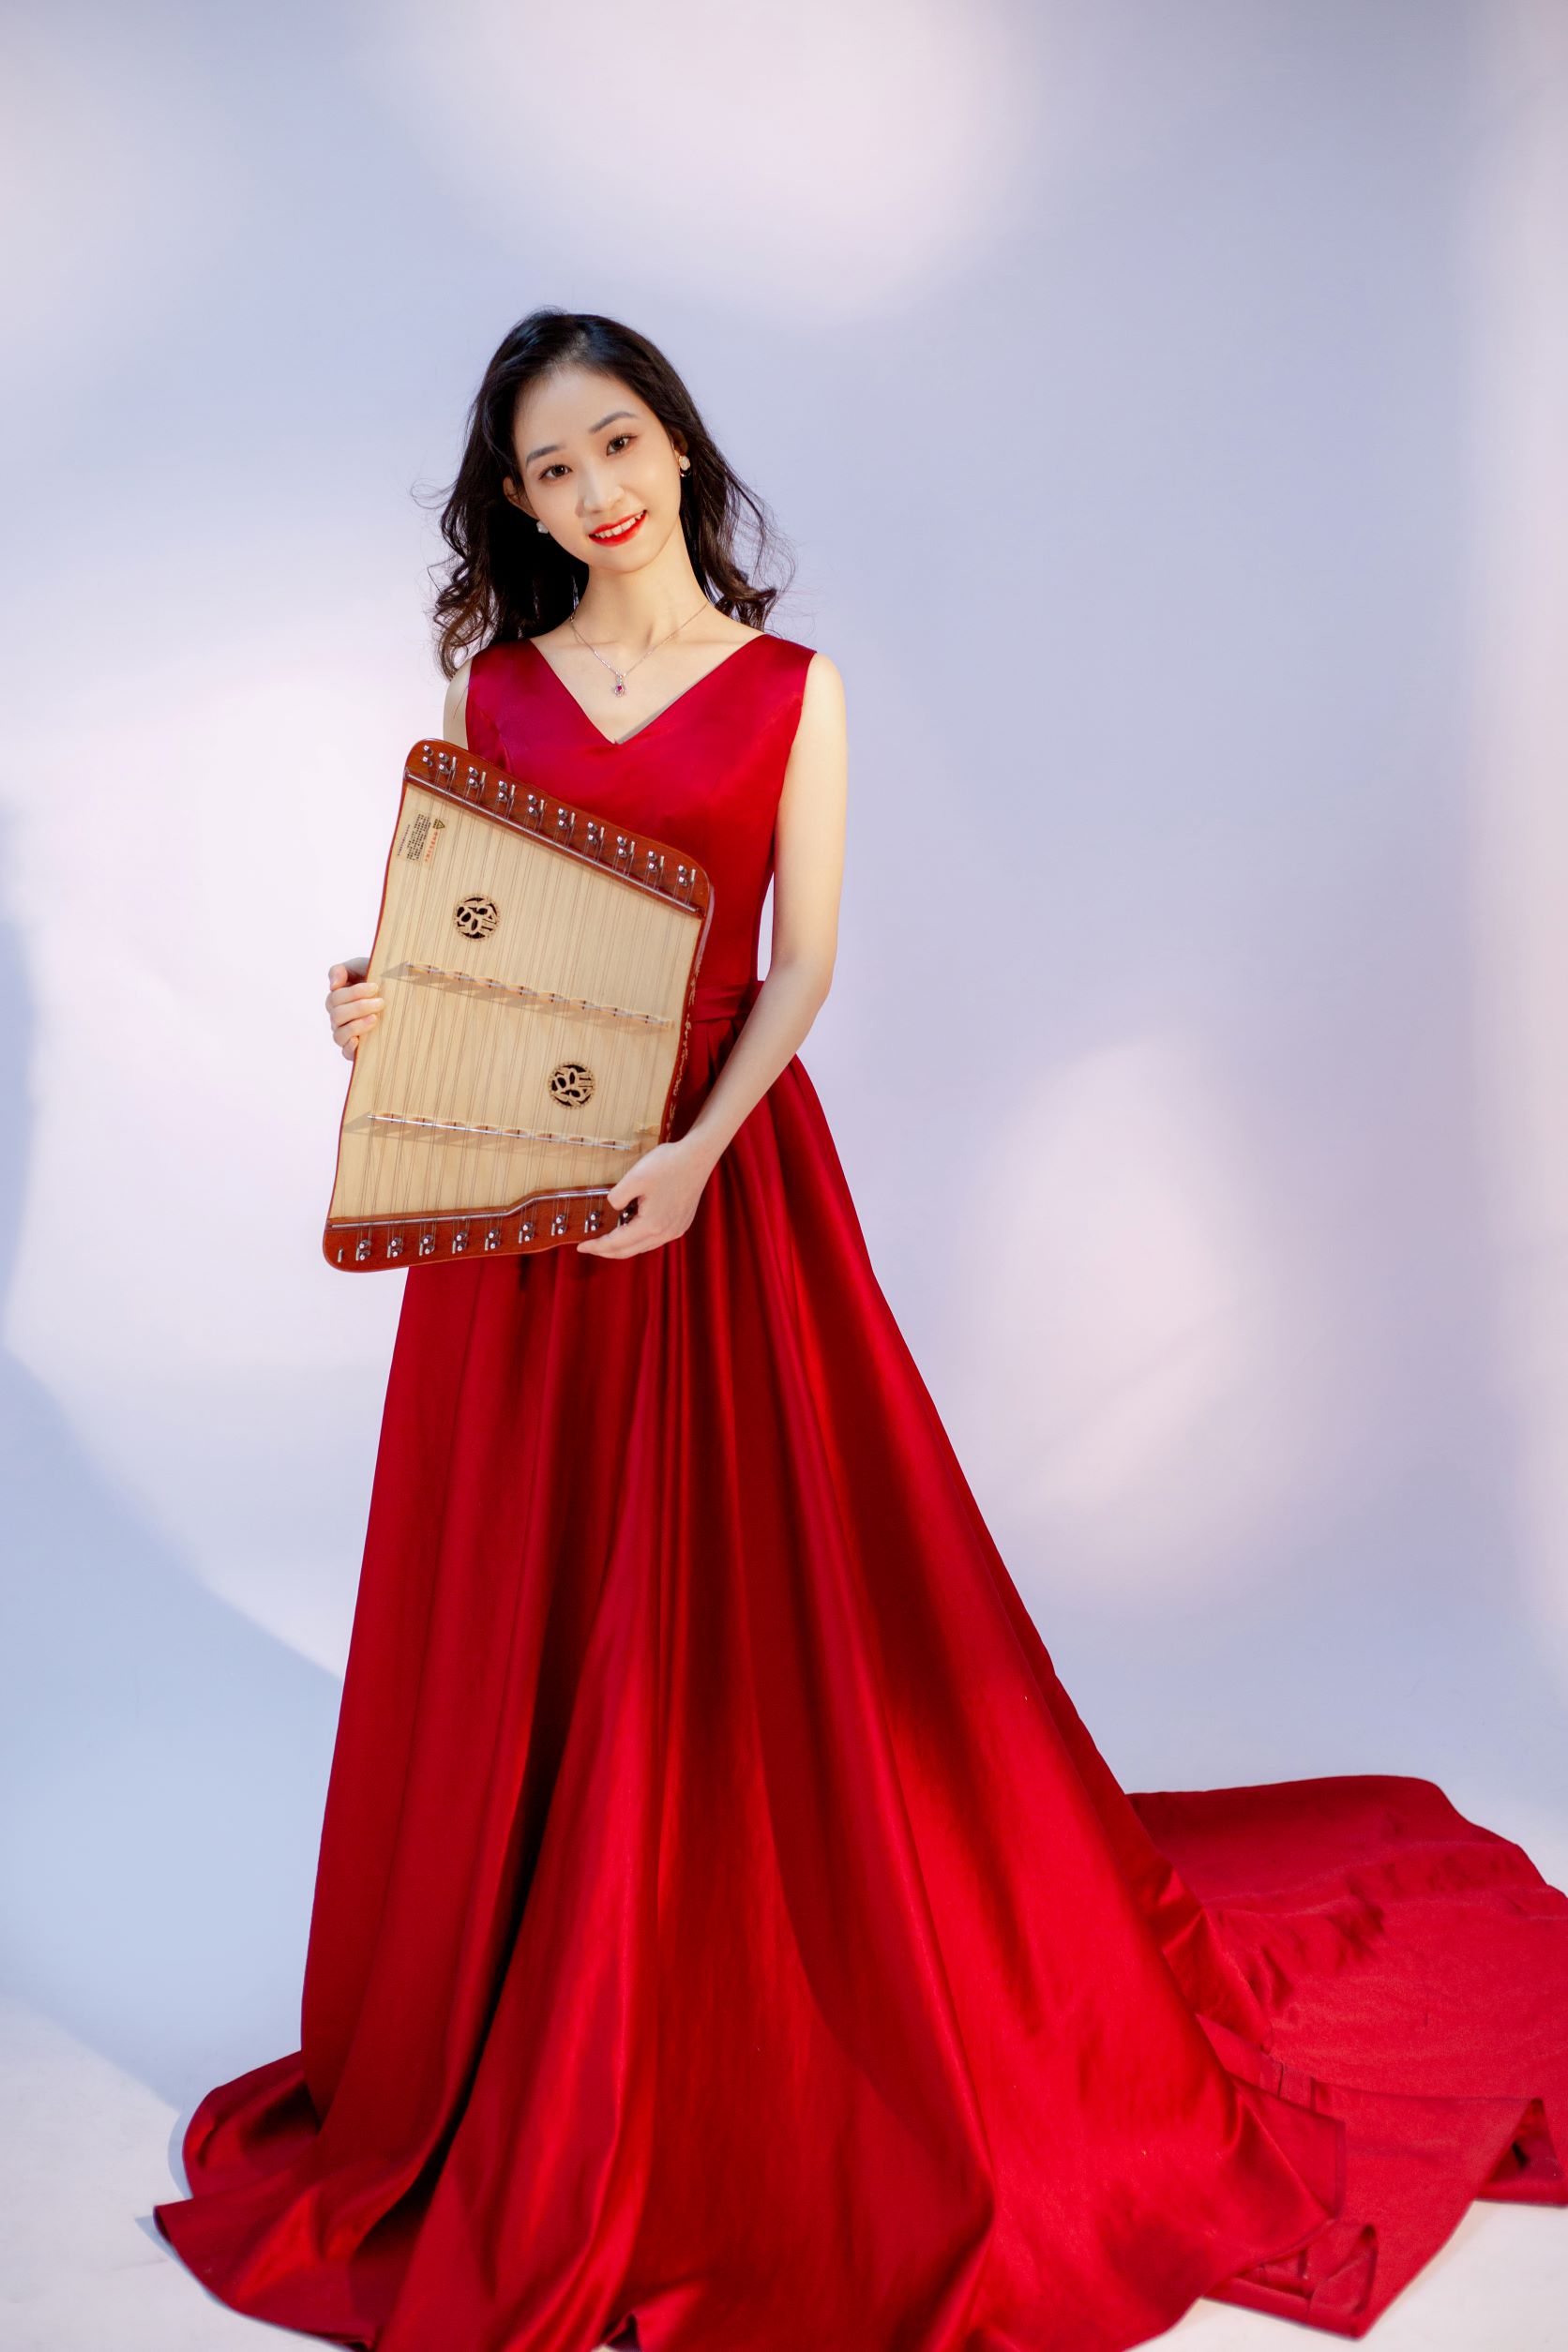 Picture of Liu Lyujing.  She is smiling at the camera while wearing a formal red gown and holding a small zither.